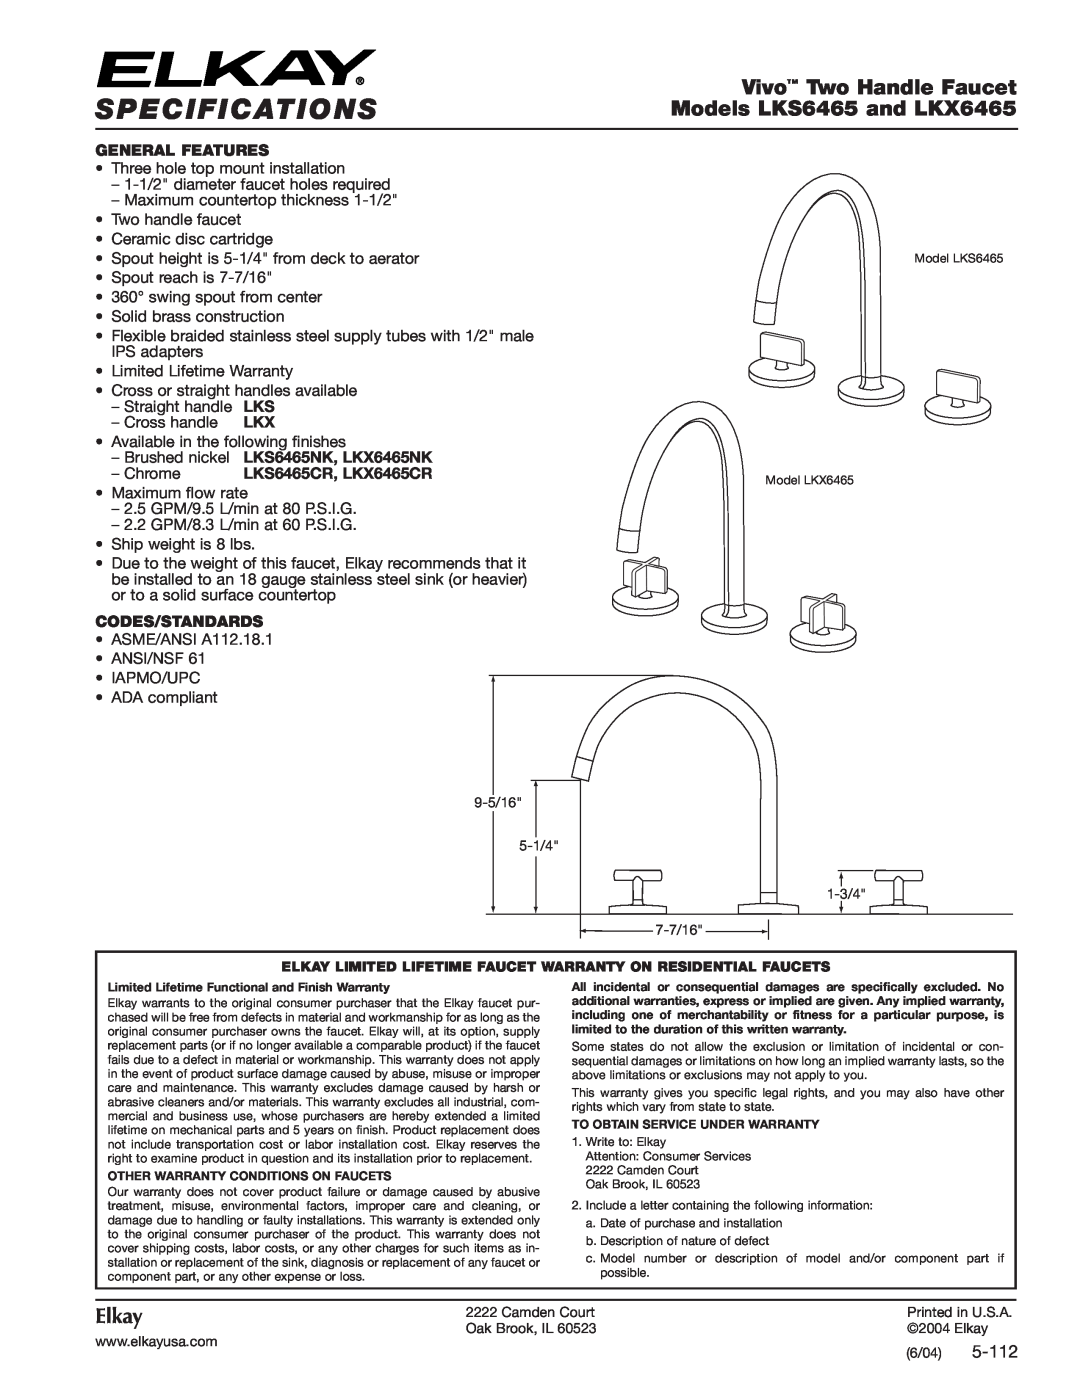 Elkay specifications Specifications, Vivo Two Handle Faucet, Models LKS6465 and LKX6465, Elkay, 5-112, General Features 